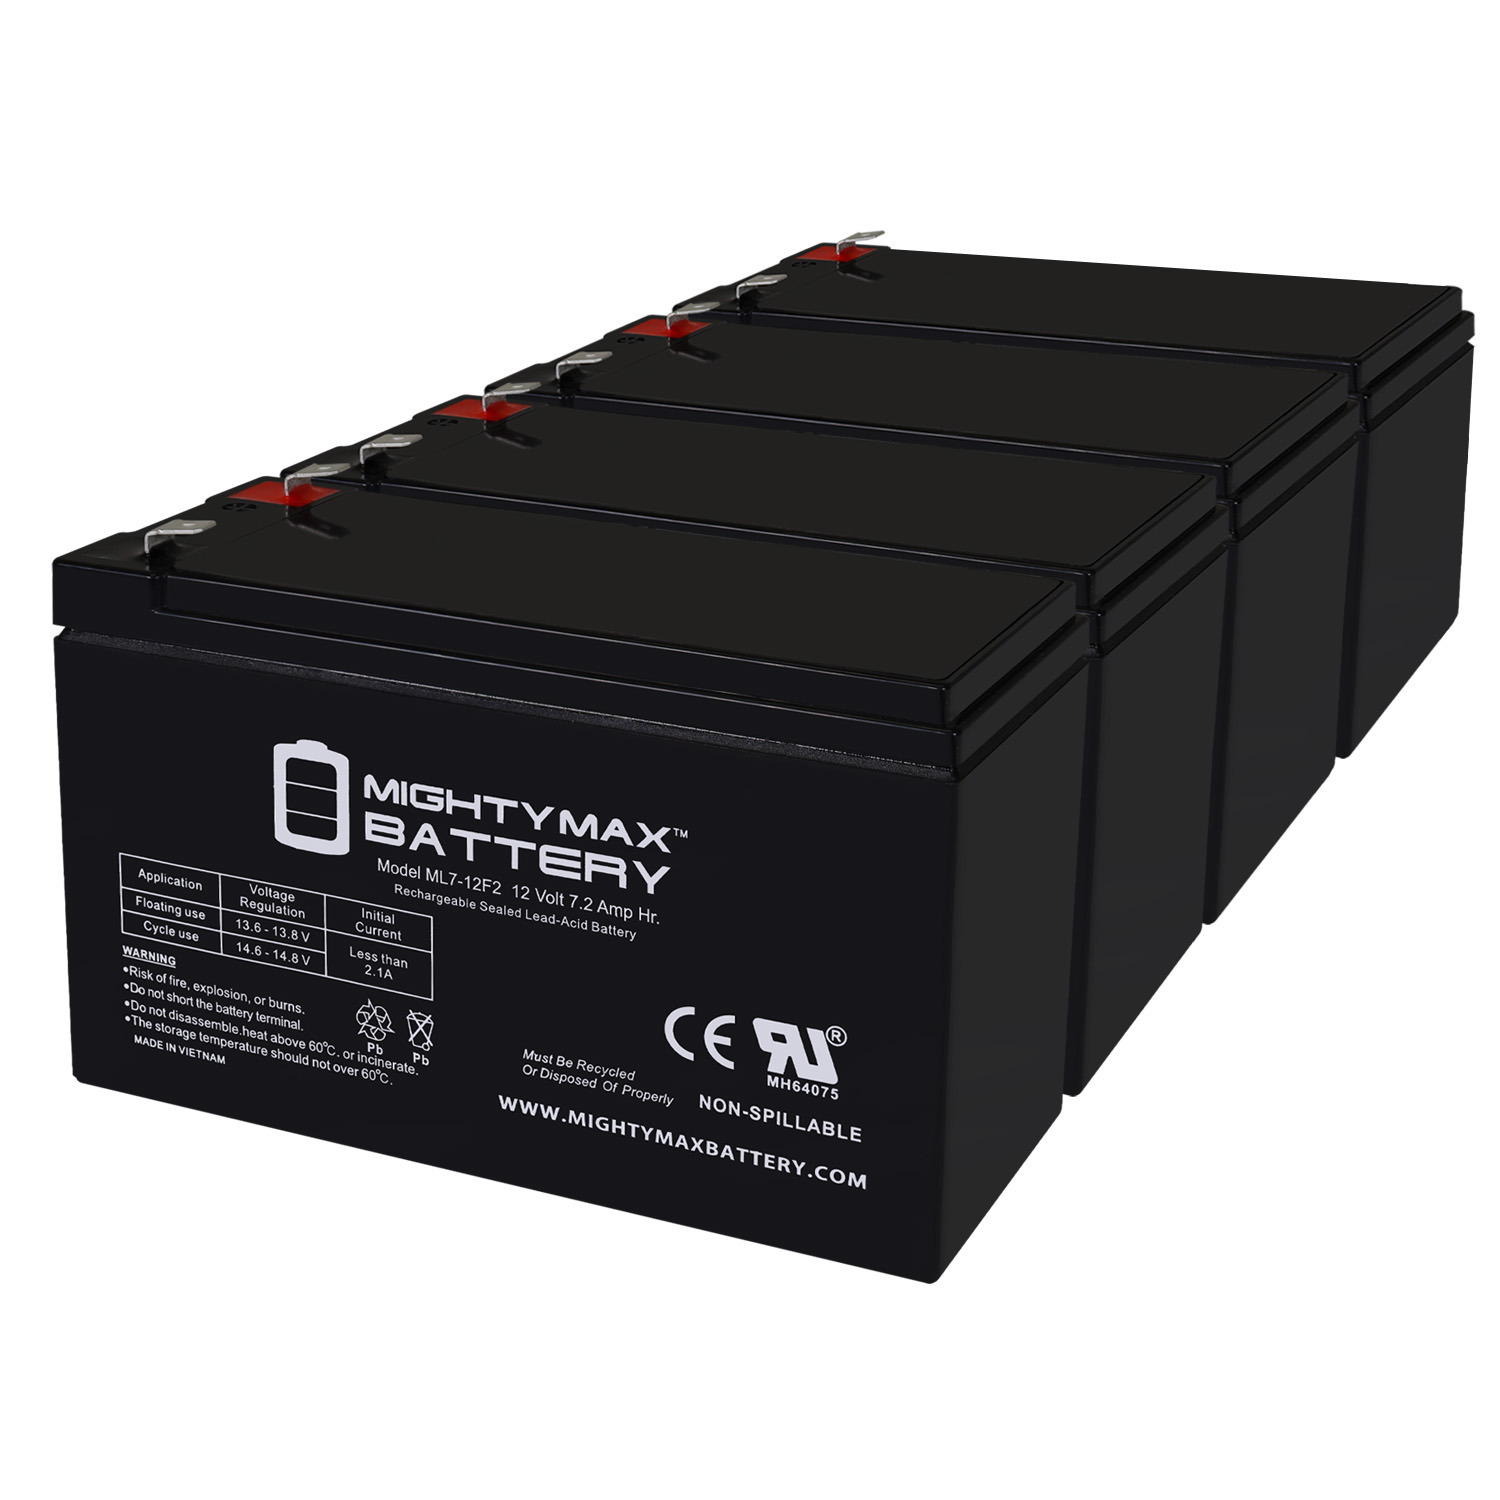 12V 7Ah F2 Replacement Battery for Minuteman BP48V13 - 4 Pack